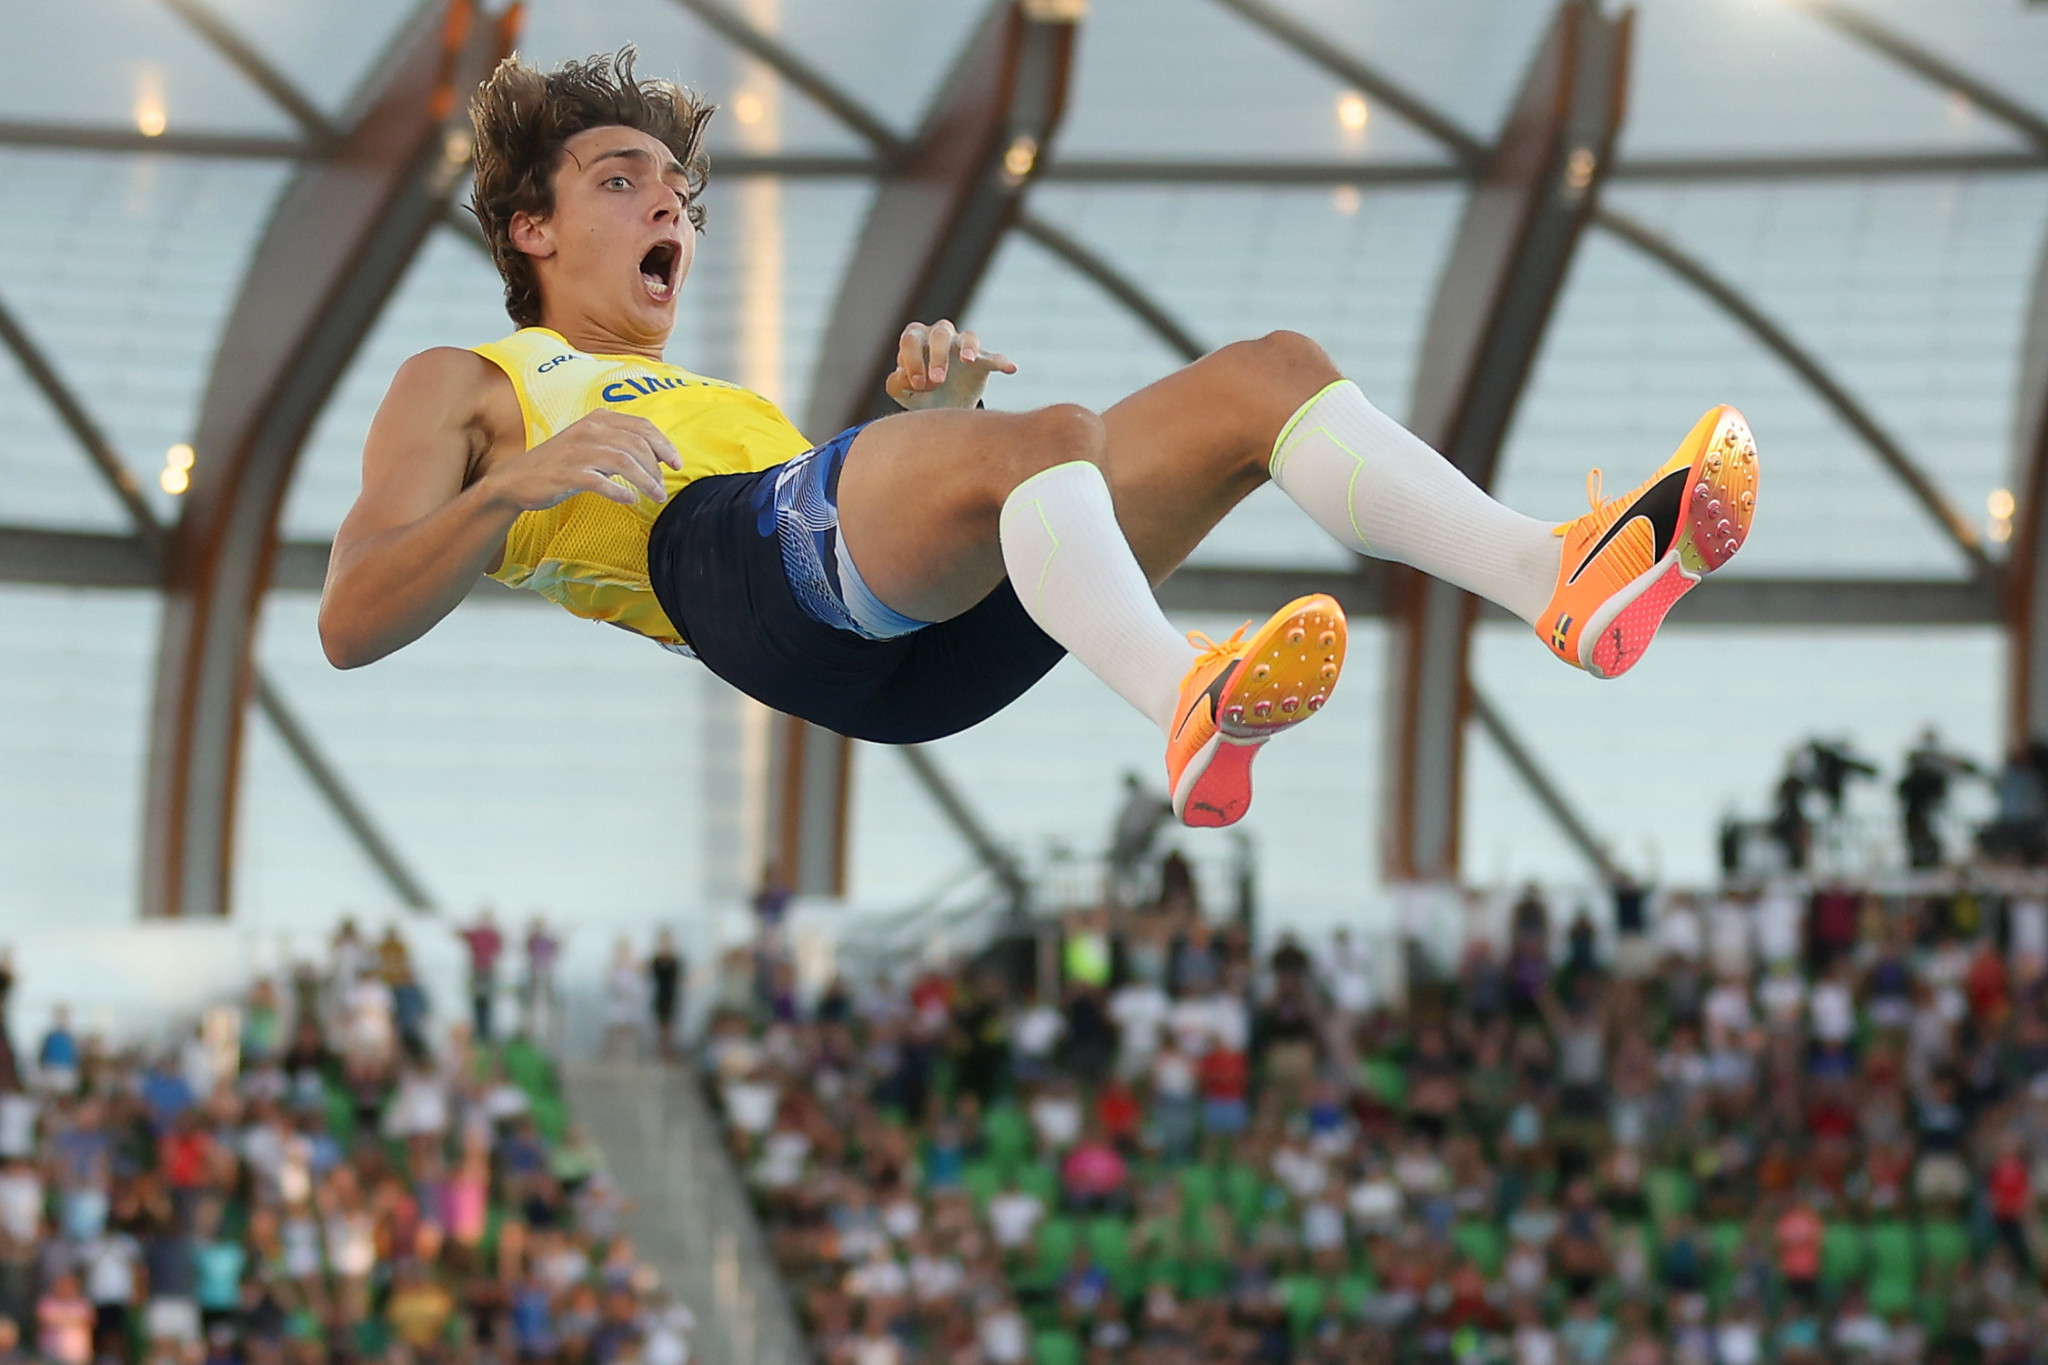 Olympic pole vault champion Mondo Duplantis shattered the world record on the final day of the World Athletics Championships ©Getty Images